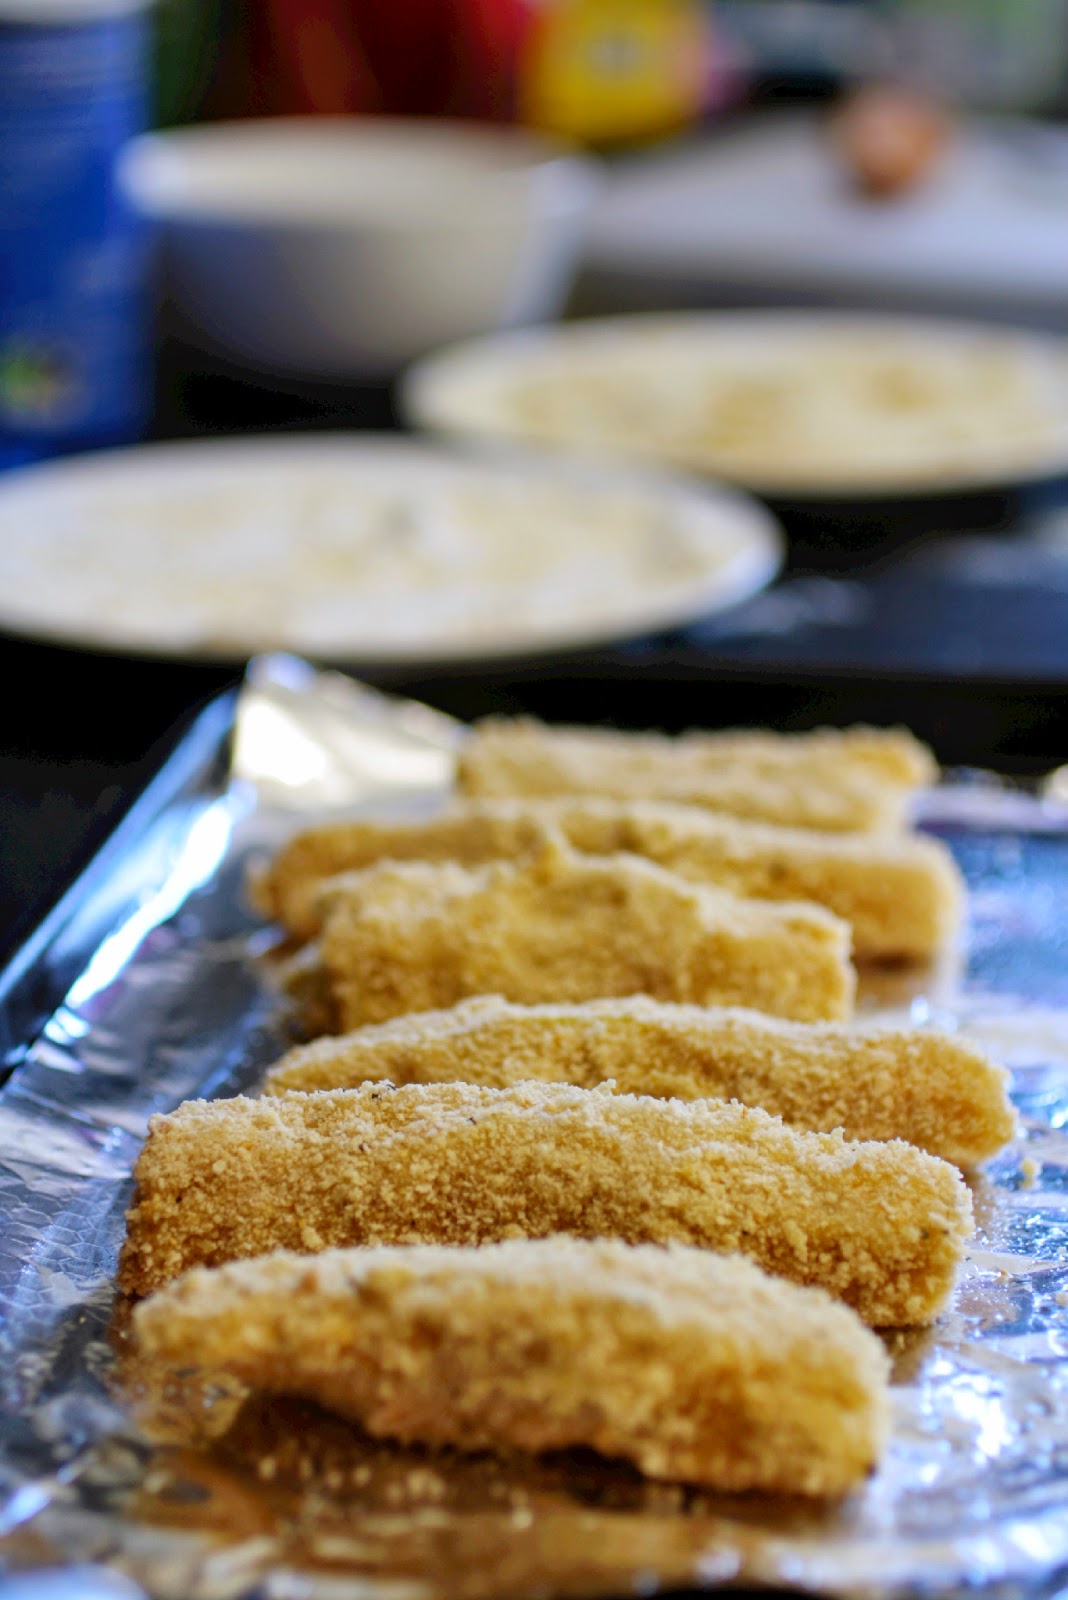 Home made baked fish fingers - using smoked haddock adds a more grown up taste to these fish sticks that kids (and big kids!) will both love and baking them is far healthier than frying!